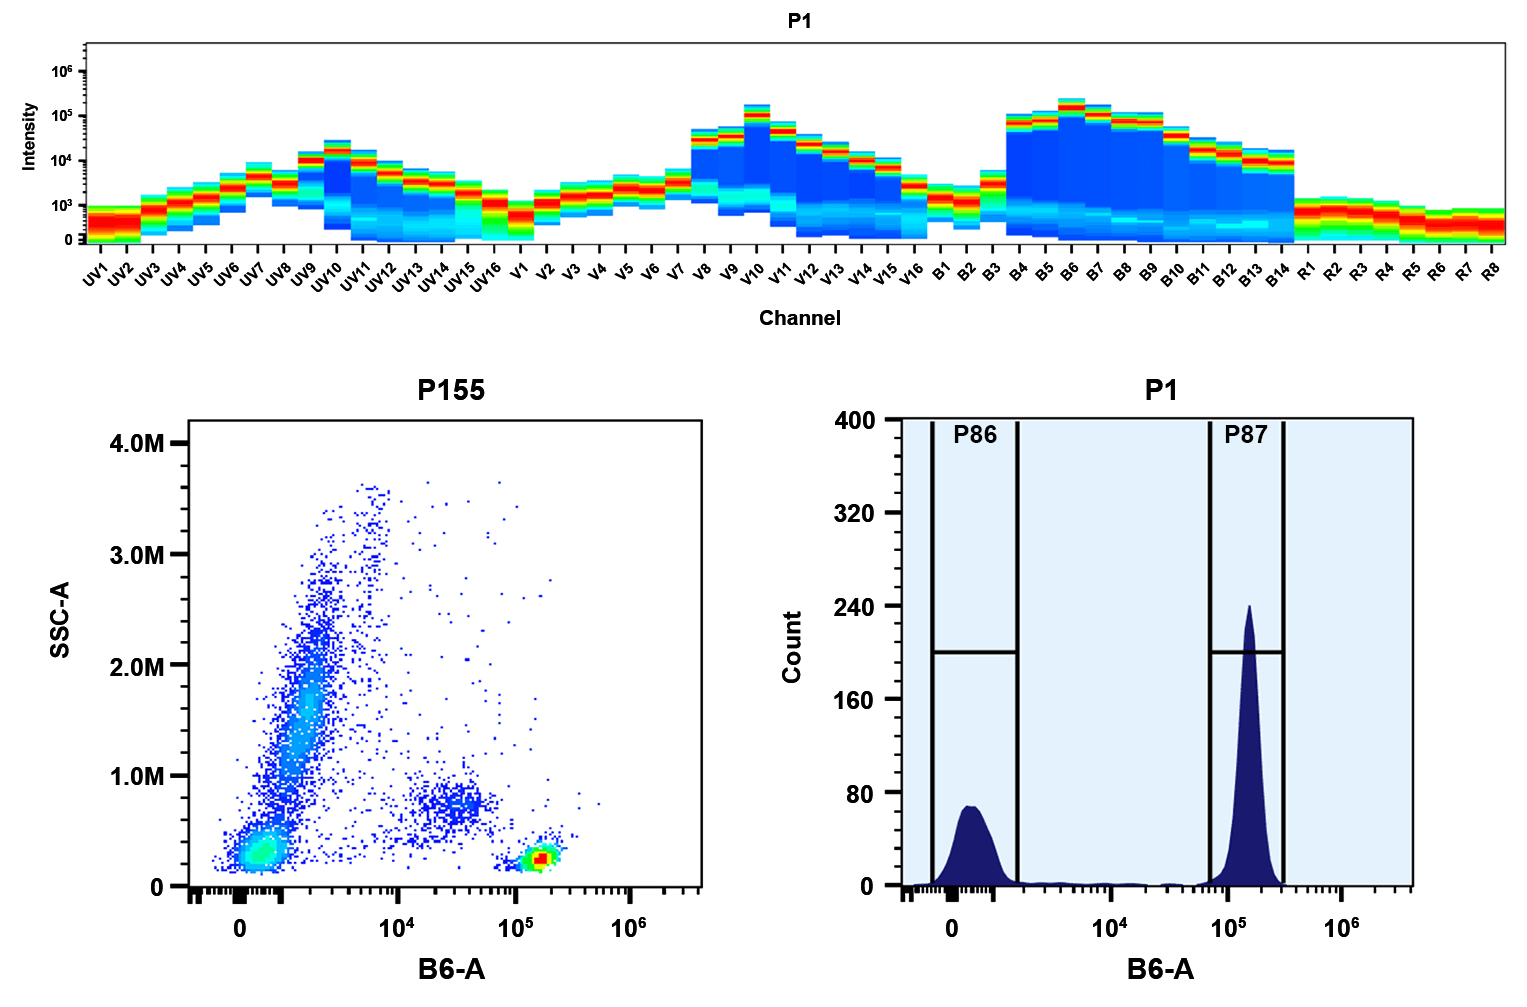 Top) Spectral pattern was generated using a 4-laser spectral cytometer. Spatially offset lasers (355 nm, 405 nm, 488 nm, and 640 nm) were used to create four distinct emission profiles, then, when combined, yielded the overall spectral signature.

Bottom) Flow cytometry analysis of whole blood stained with PE/XFD594 anti-human CD4 *SK3* conjugate. The fluorescence signal was monitored using an Aurora spectral flow cytometer in the B6-A channel.
